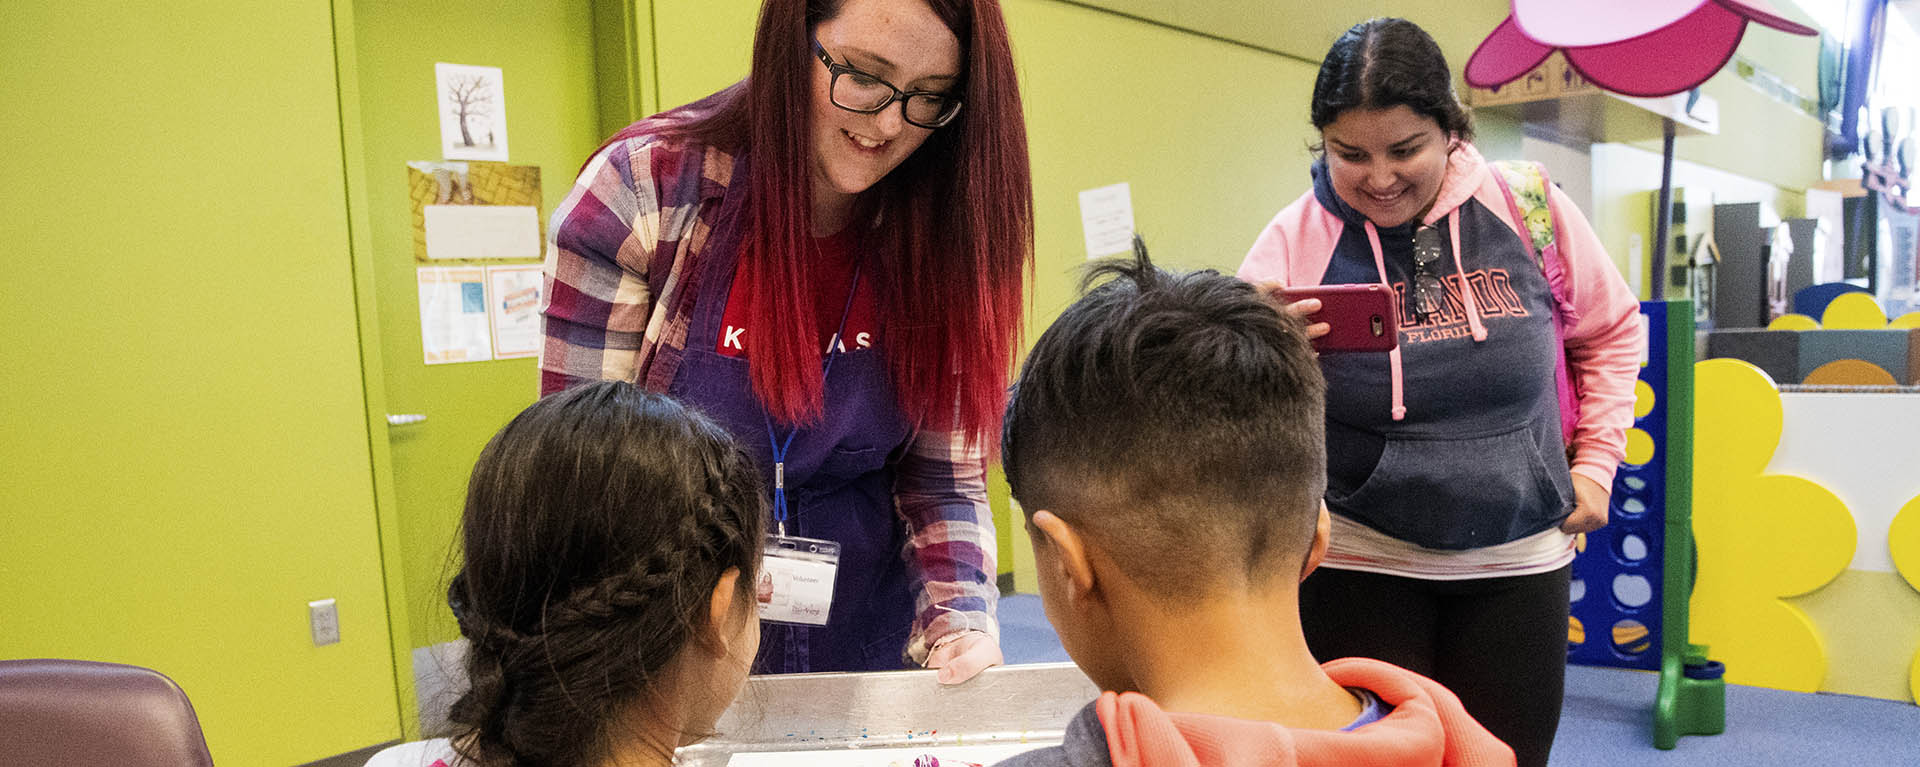 A bonner scholar volunteers in a children's museum as part of their project.